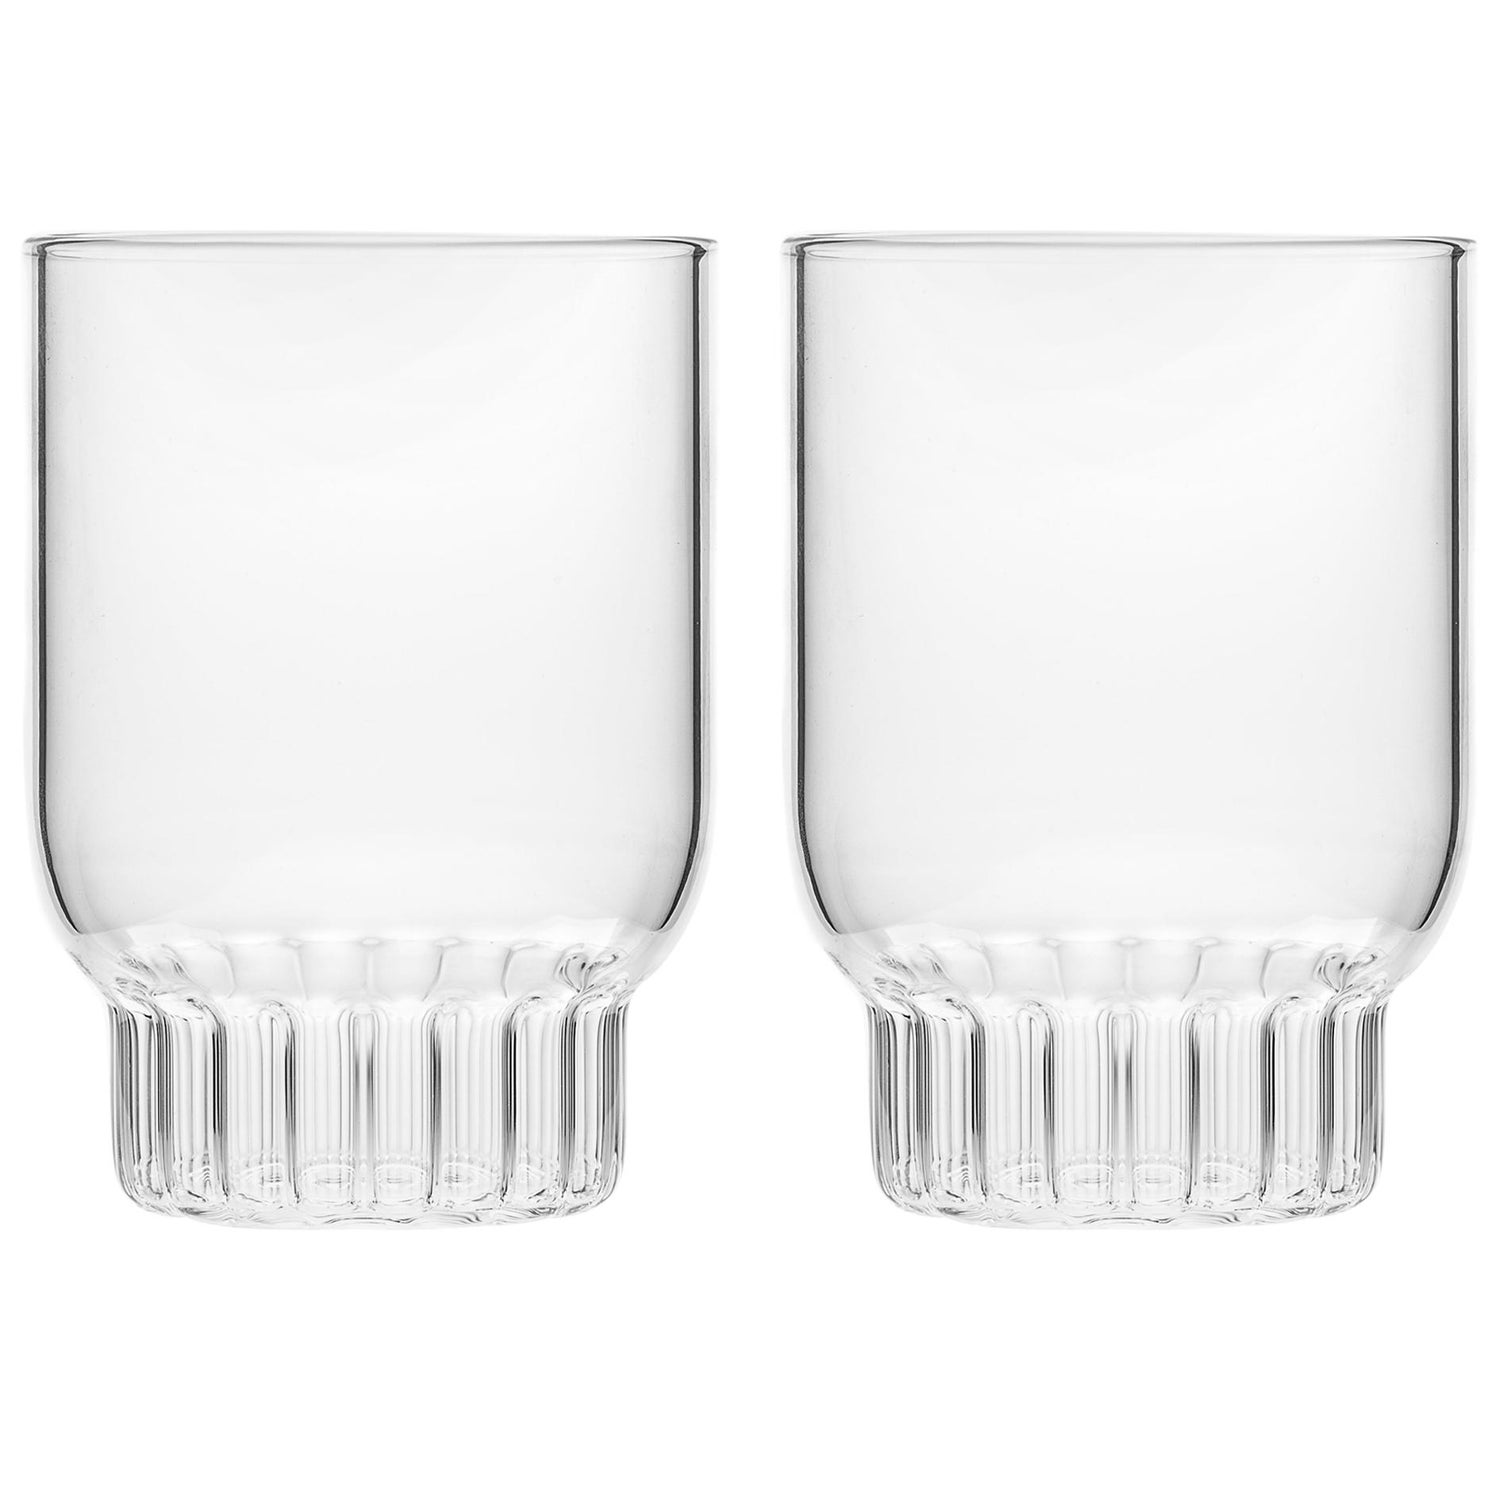 https://a.1stdibscdn.com/set-of-two-czech-clear-contemporary-rasori-medium-water-glasses-in-stock-for-sale/1121189/f_114477611532153202725/11447761_master.jpg?width=1500